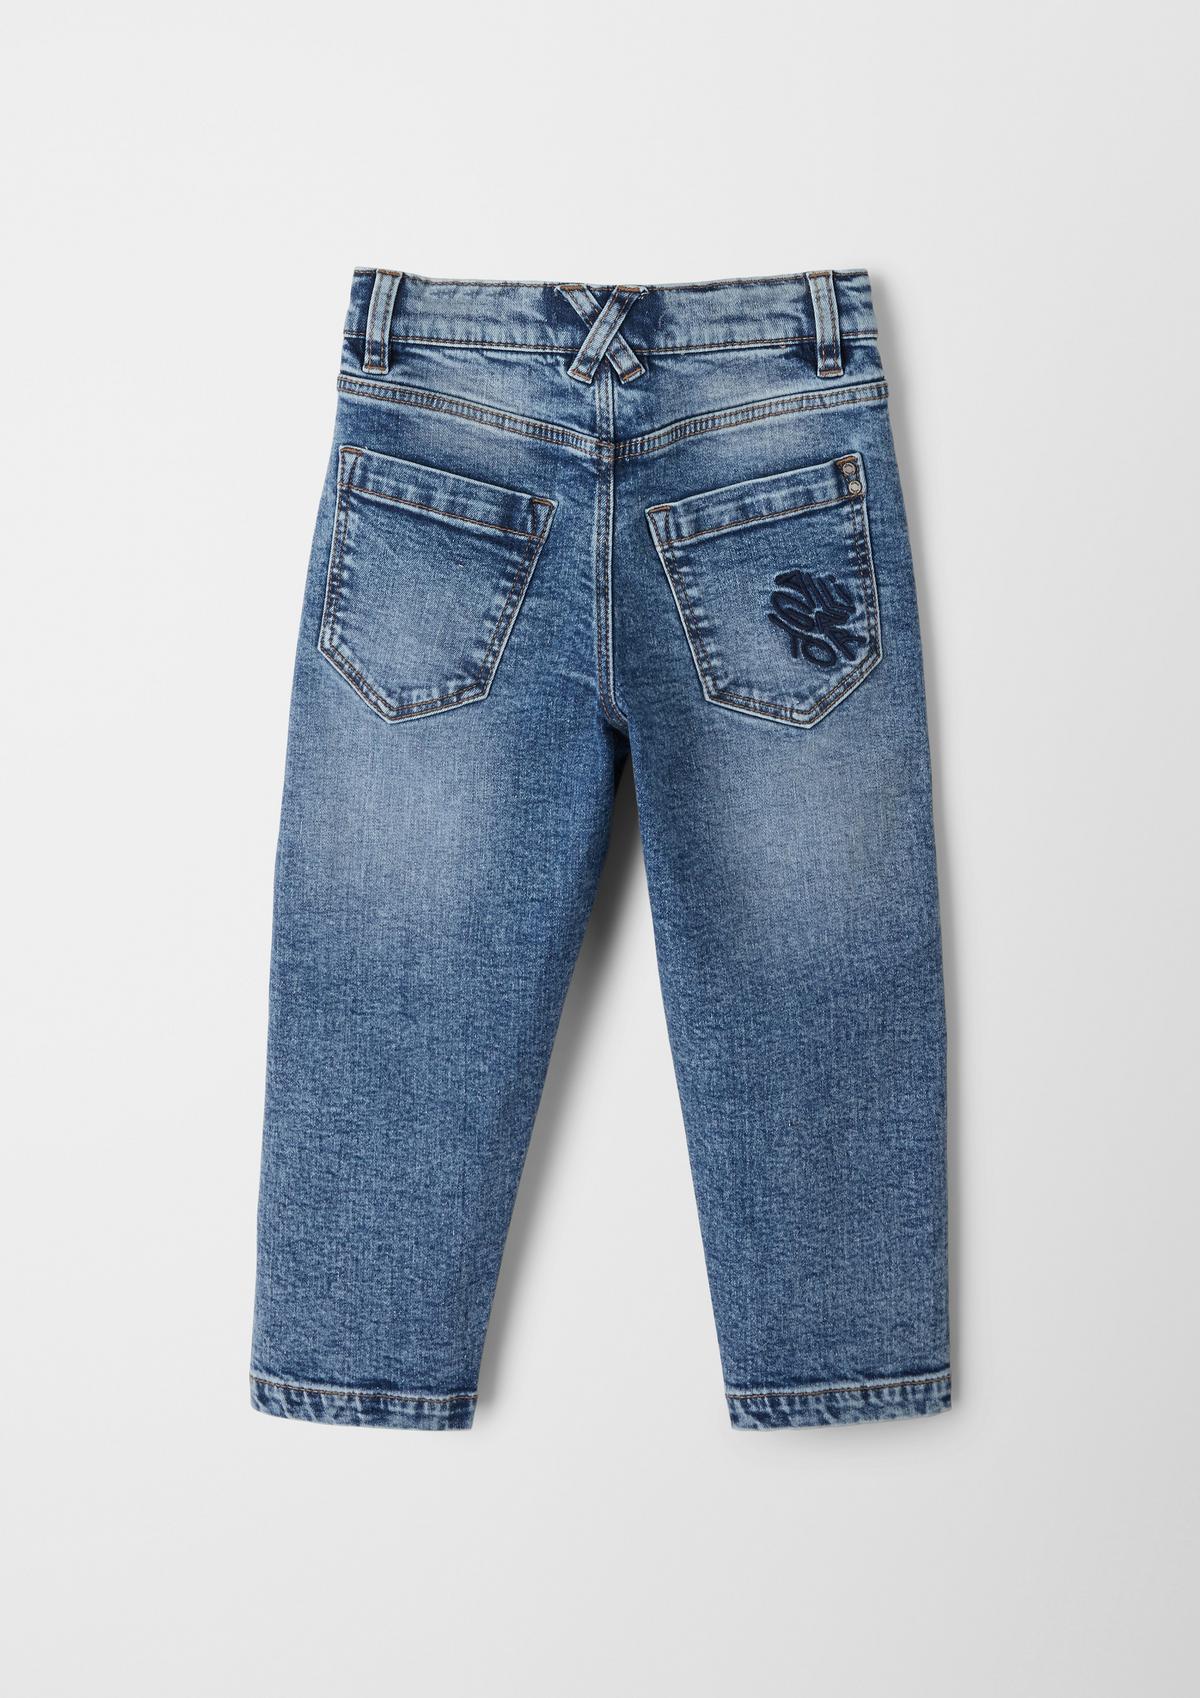 s.Oliver Dad jeans / relaxed fit / mid rise / tapered leg